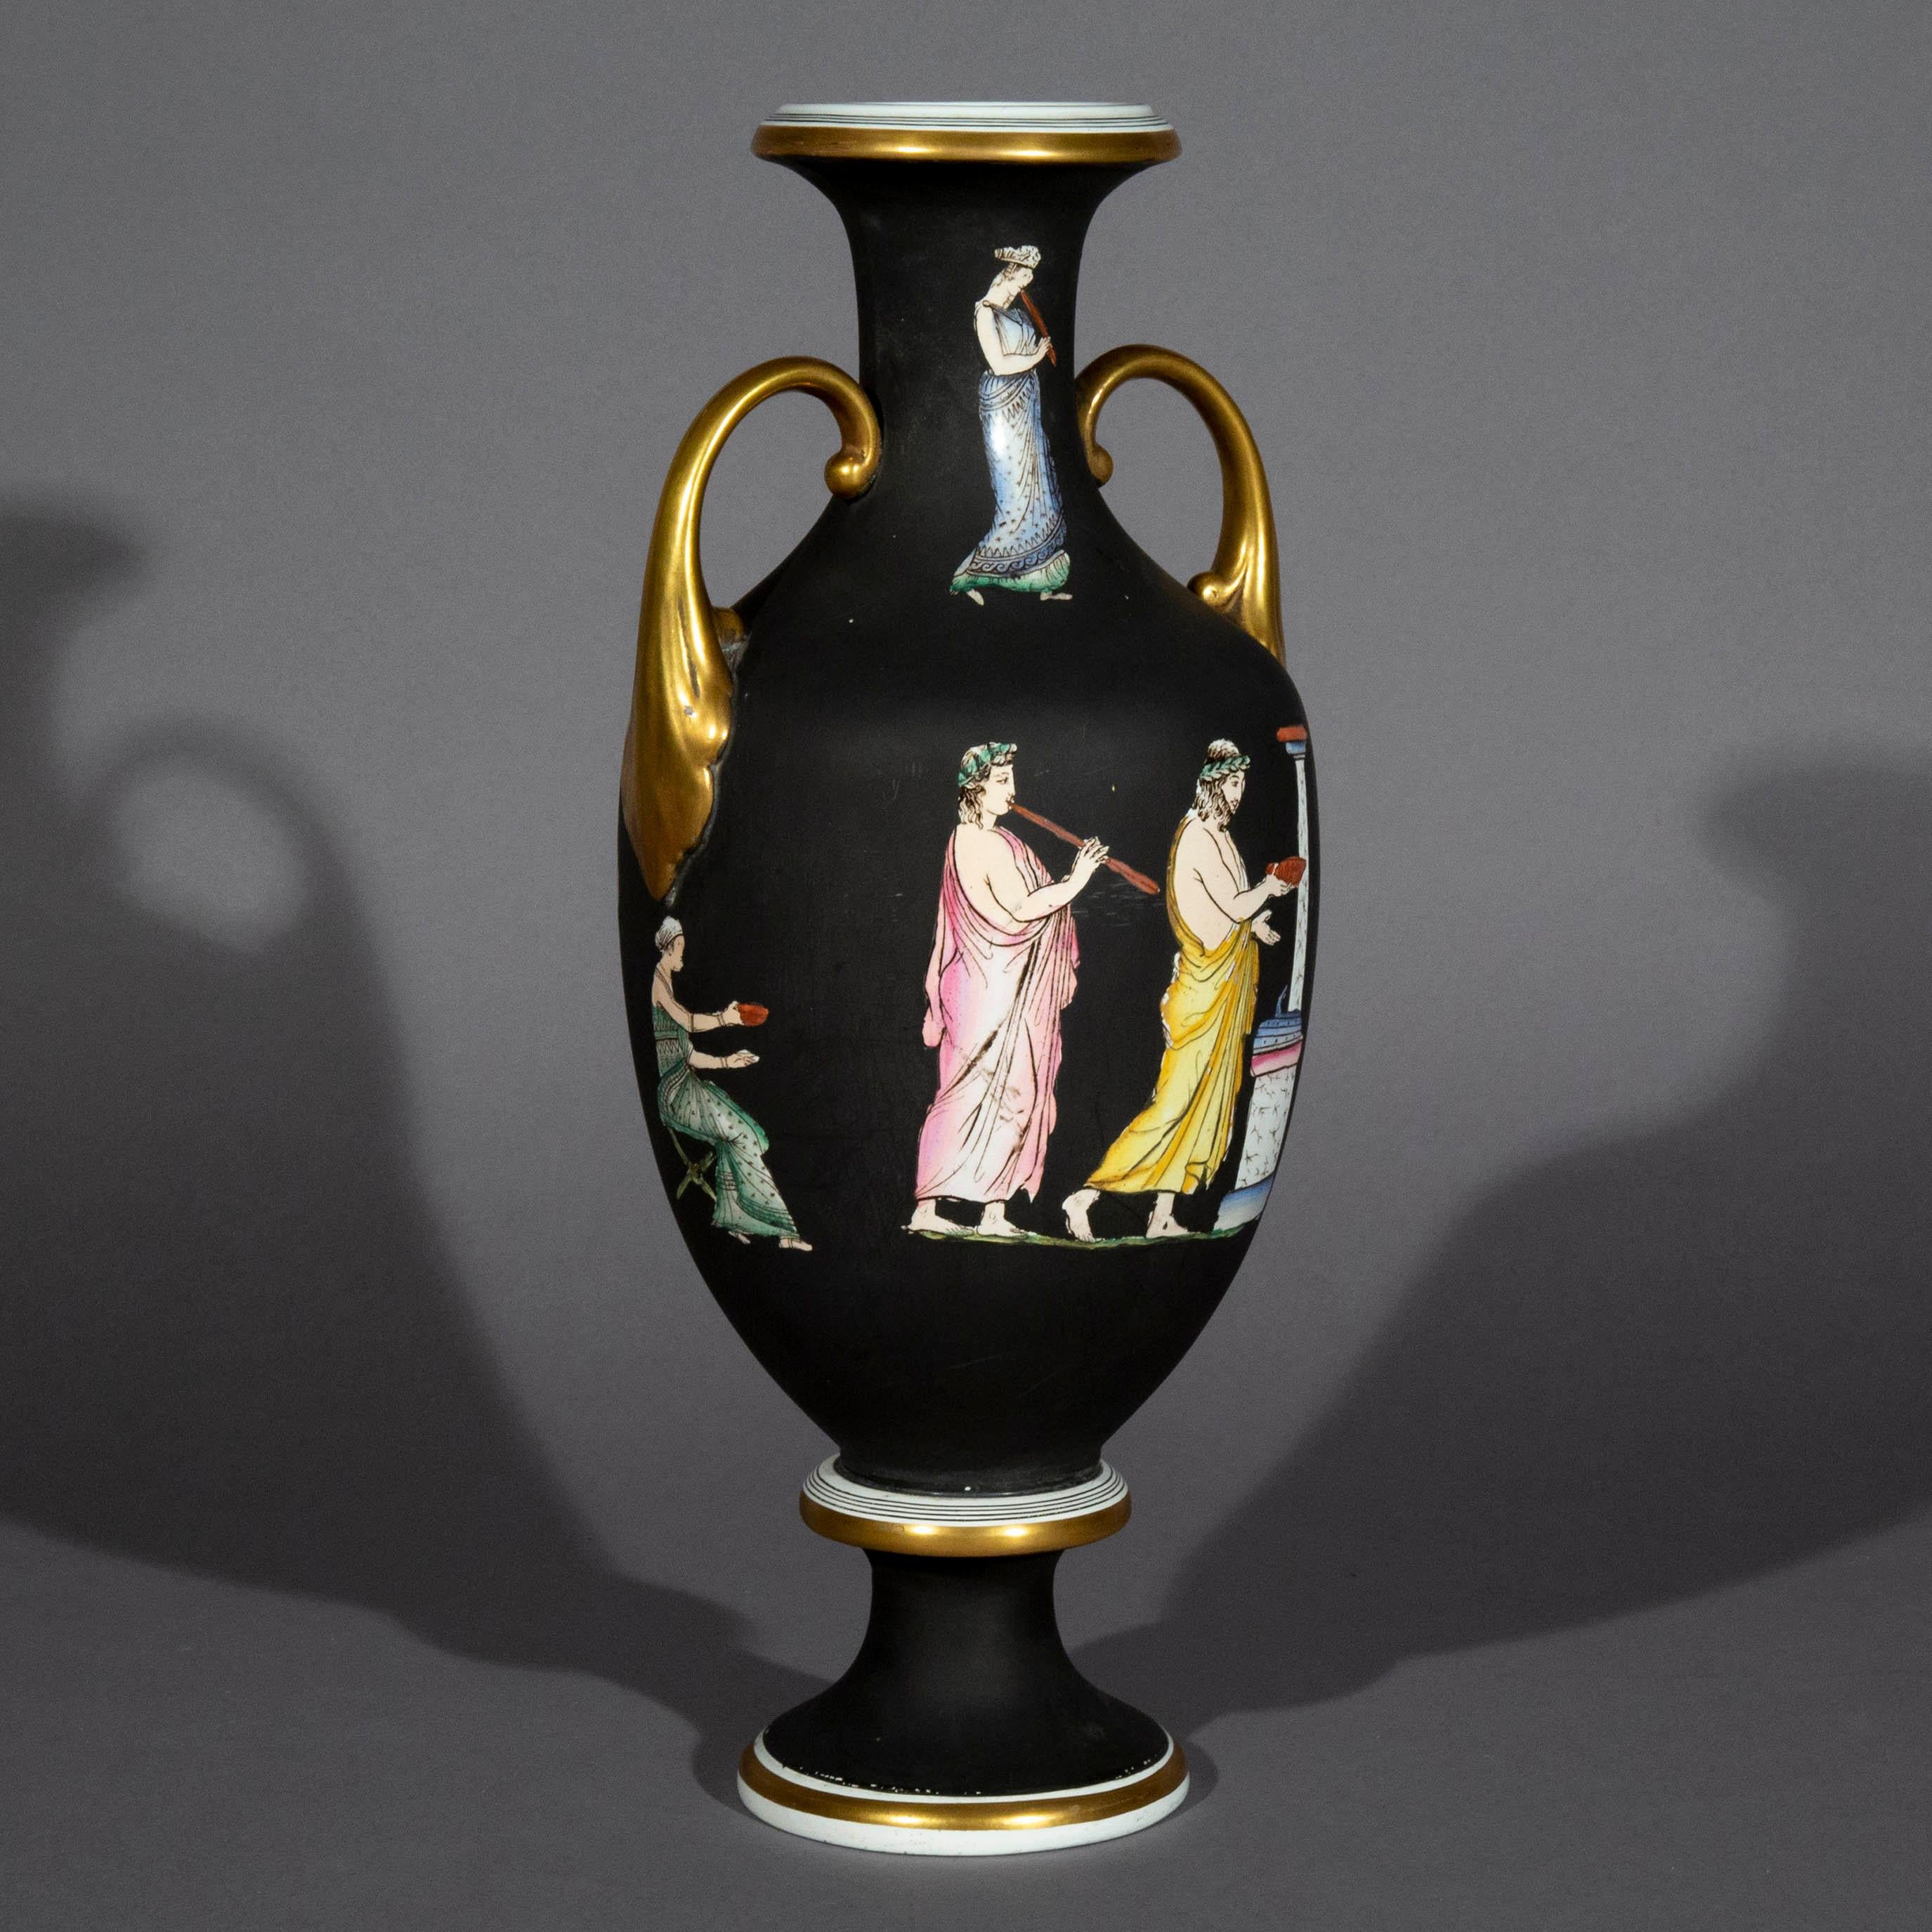 Painted Antique Grand Tour Urn Vase, Early 19th Century For Sale